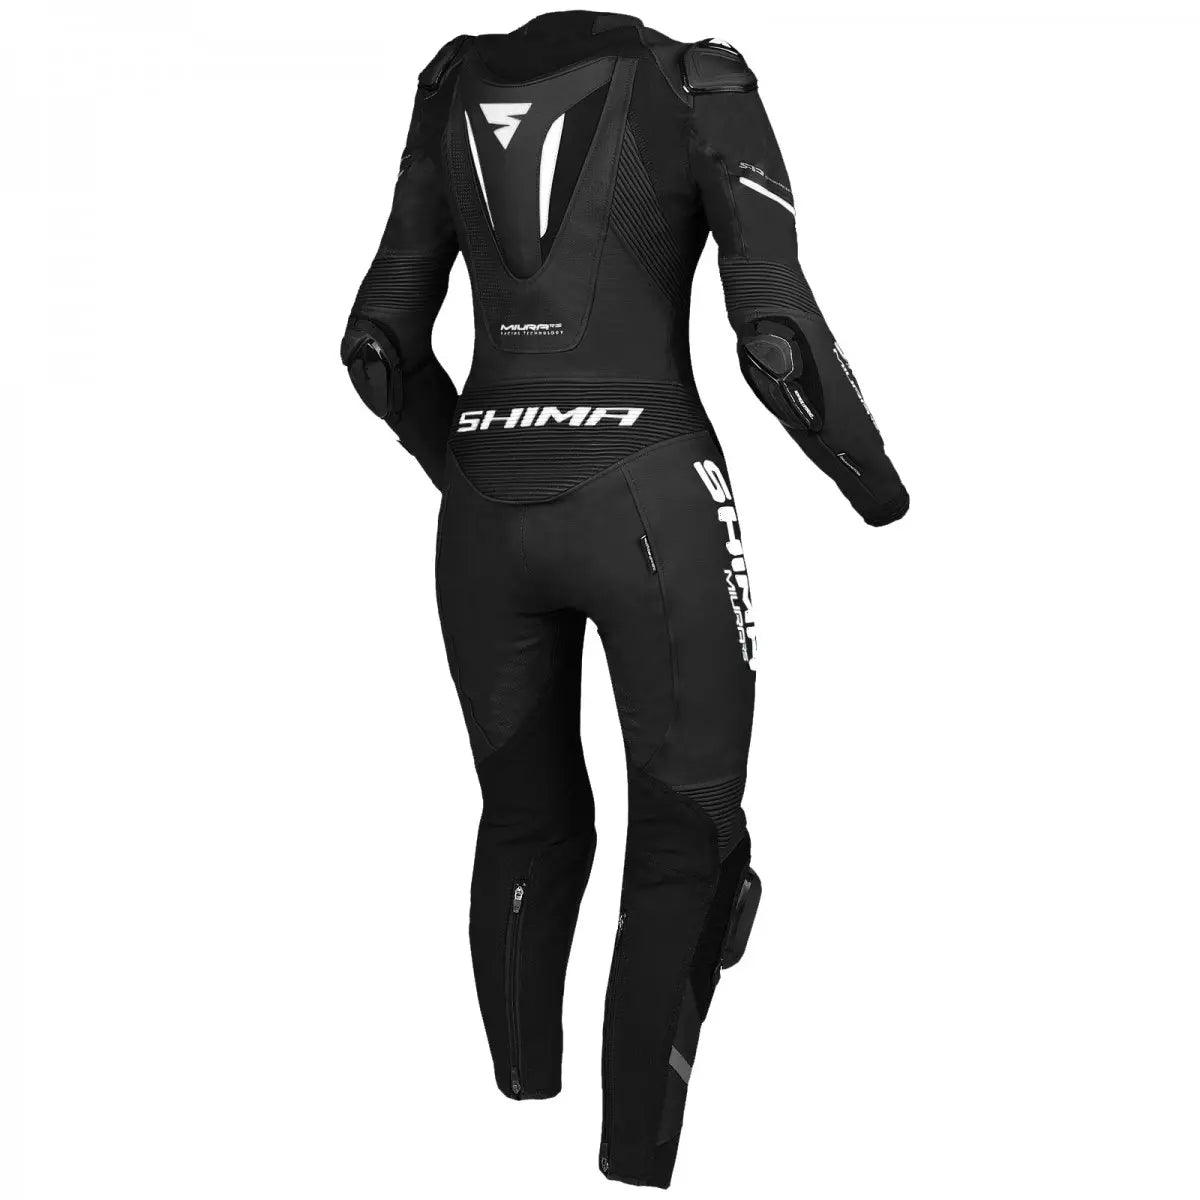 Black and white women's leather motorcycle suit from Shima